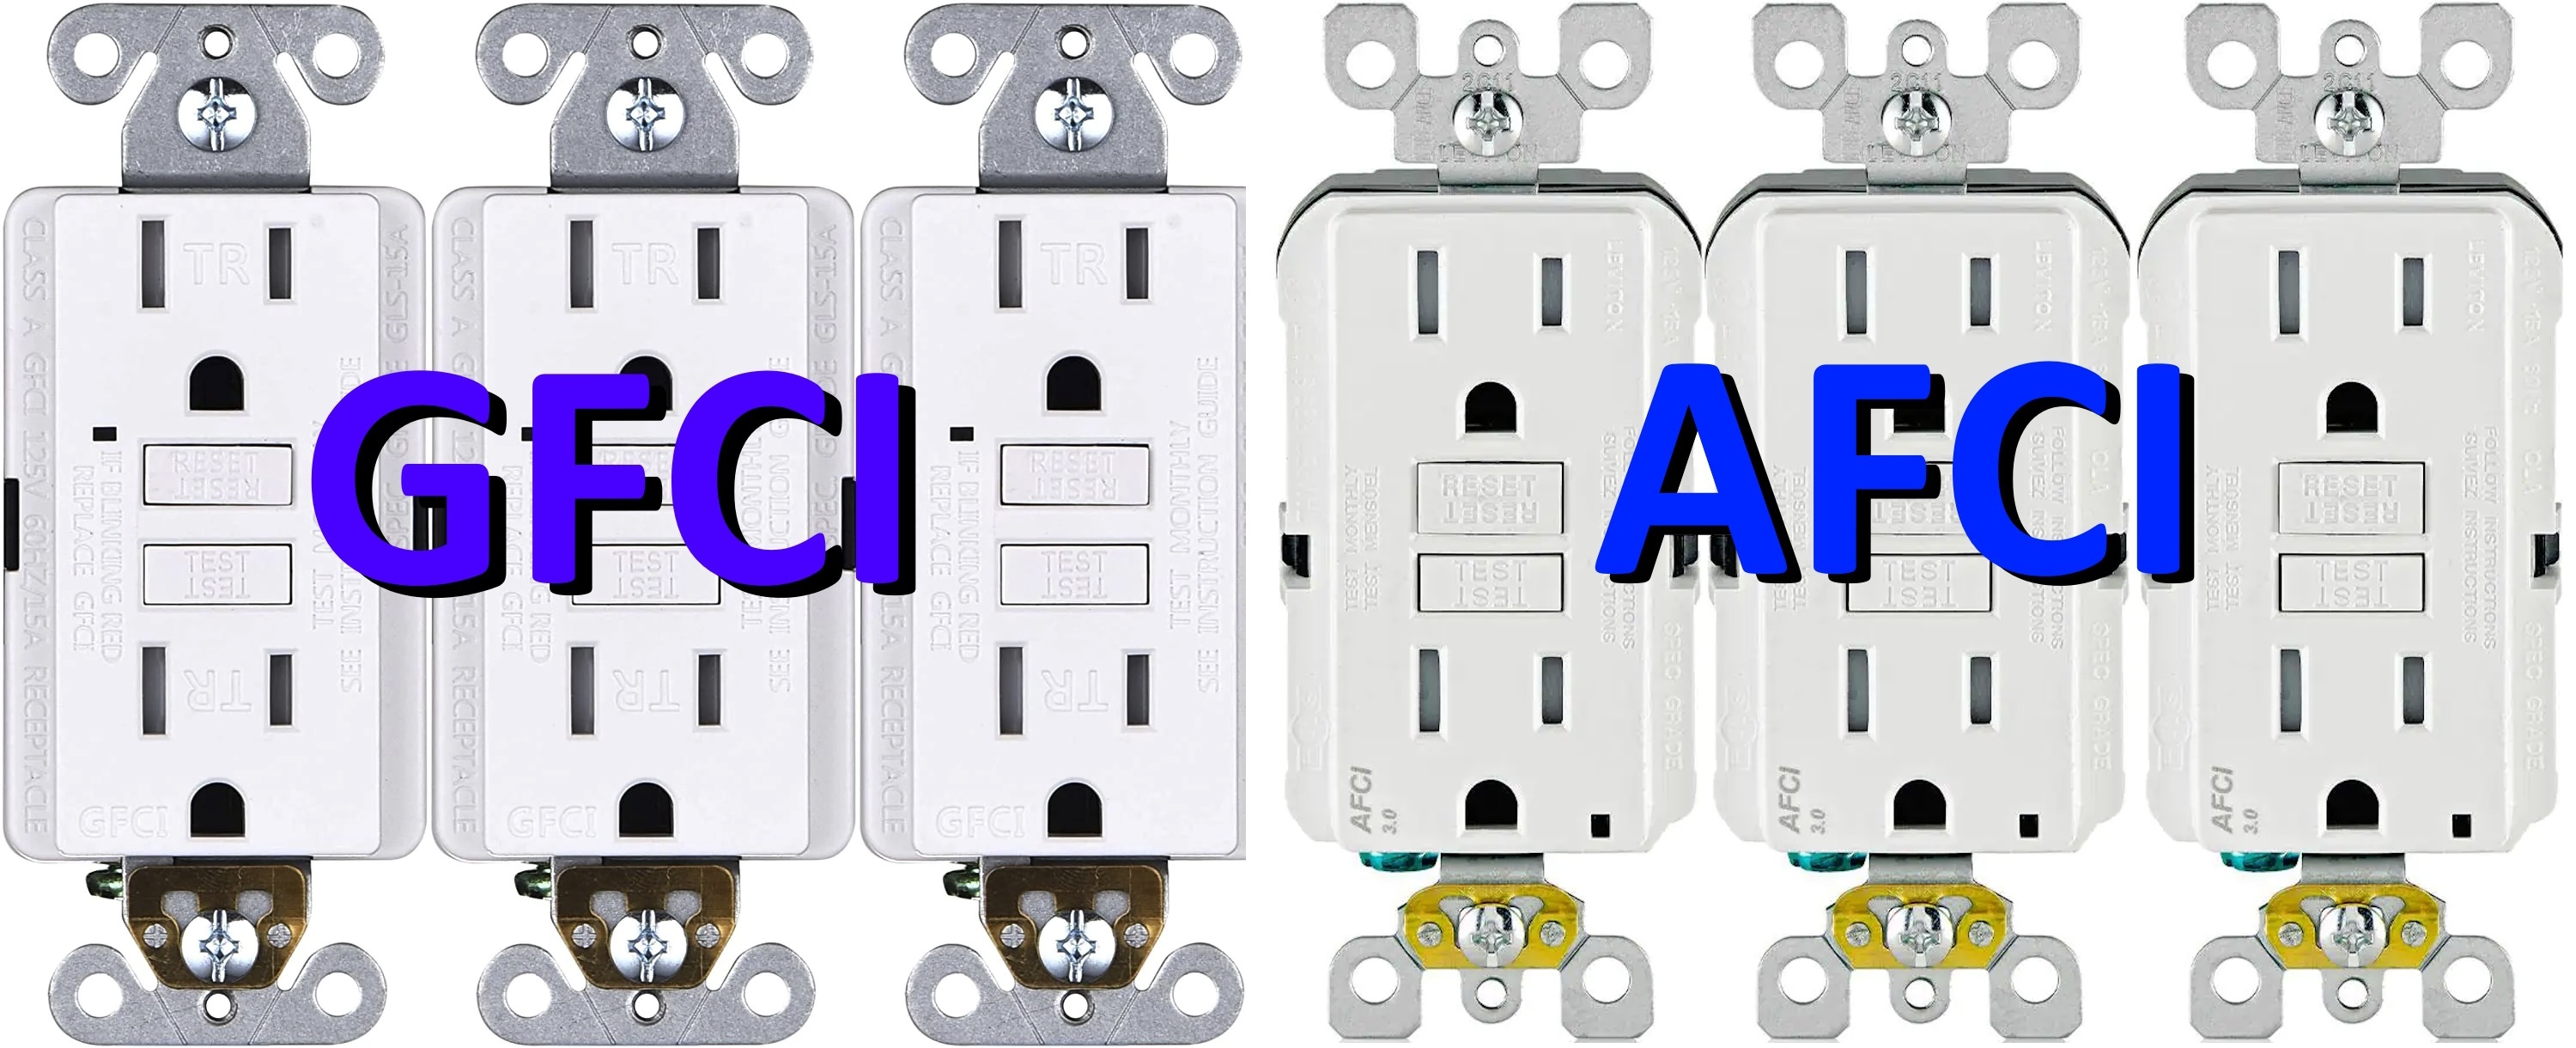 GFCI and AFCI Outlets